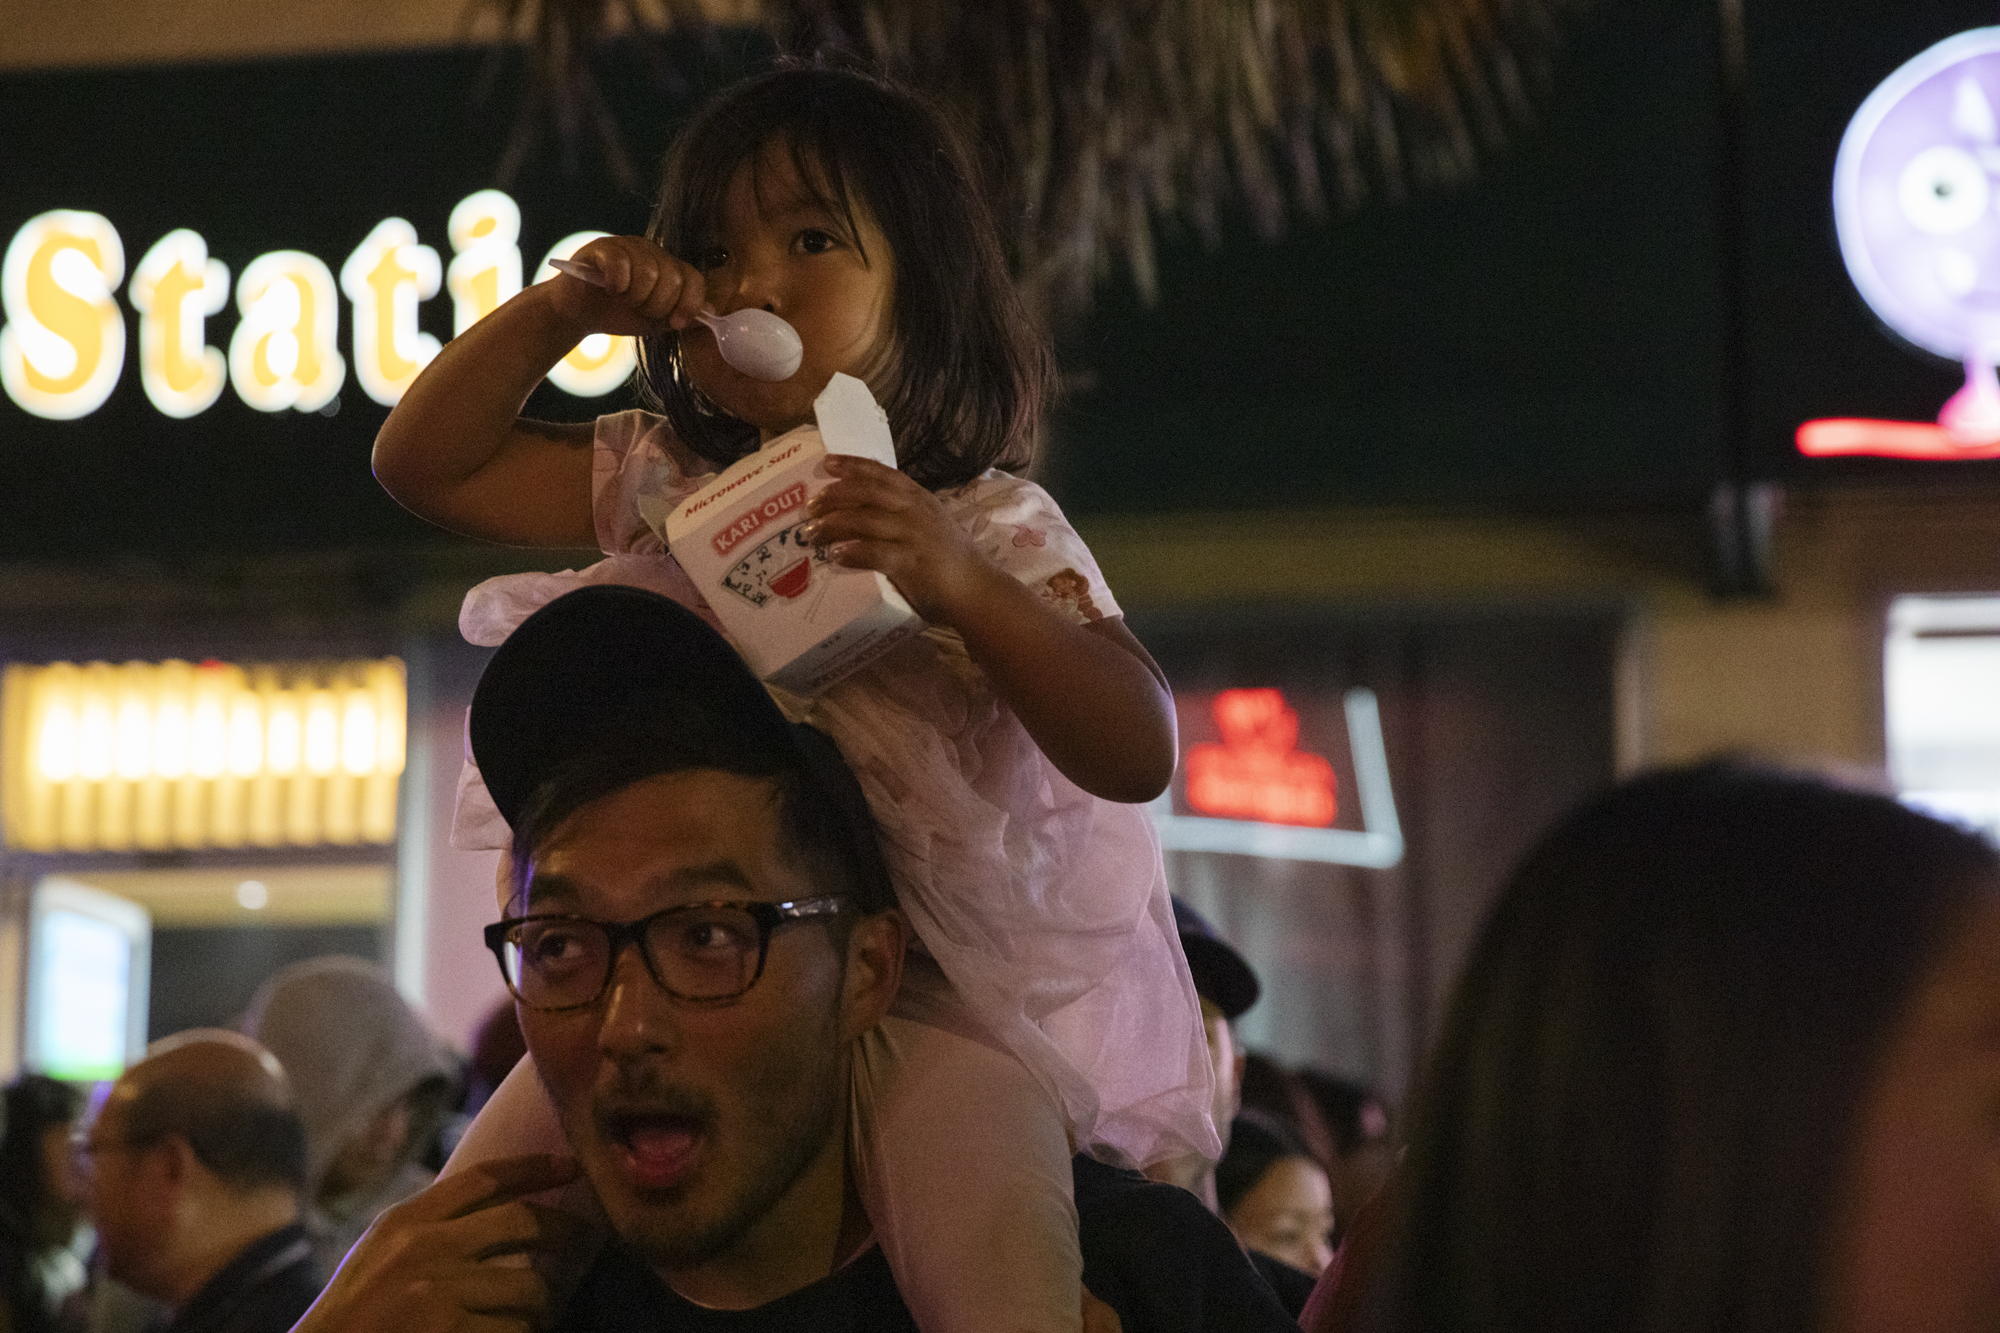 A child eats from a takeout container while sitting on their parent's shoulders.